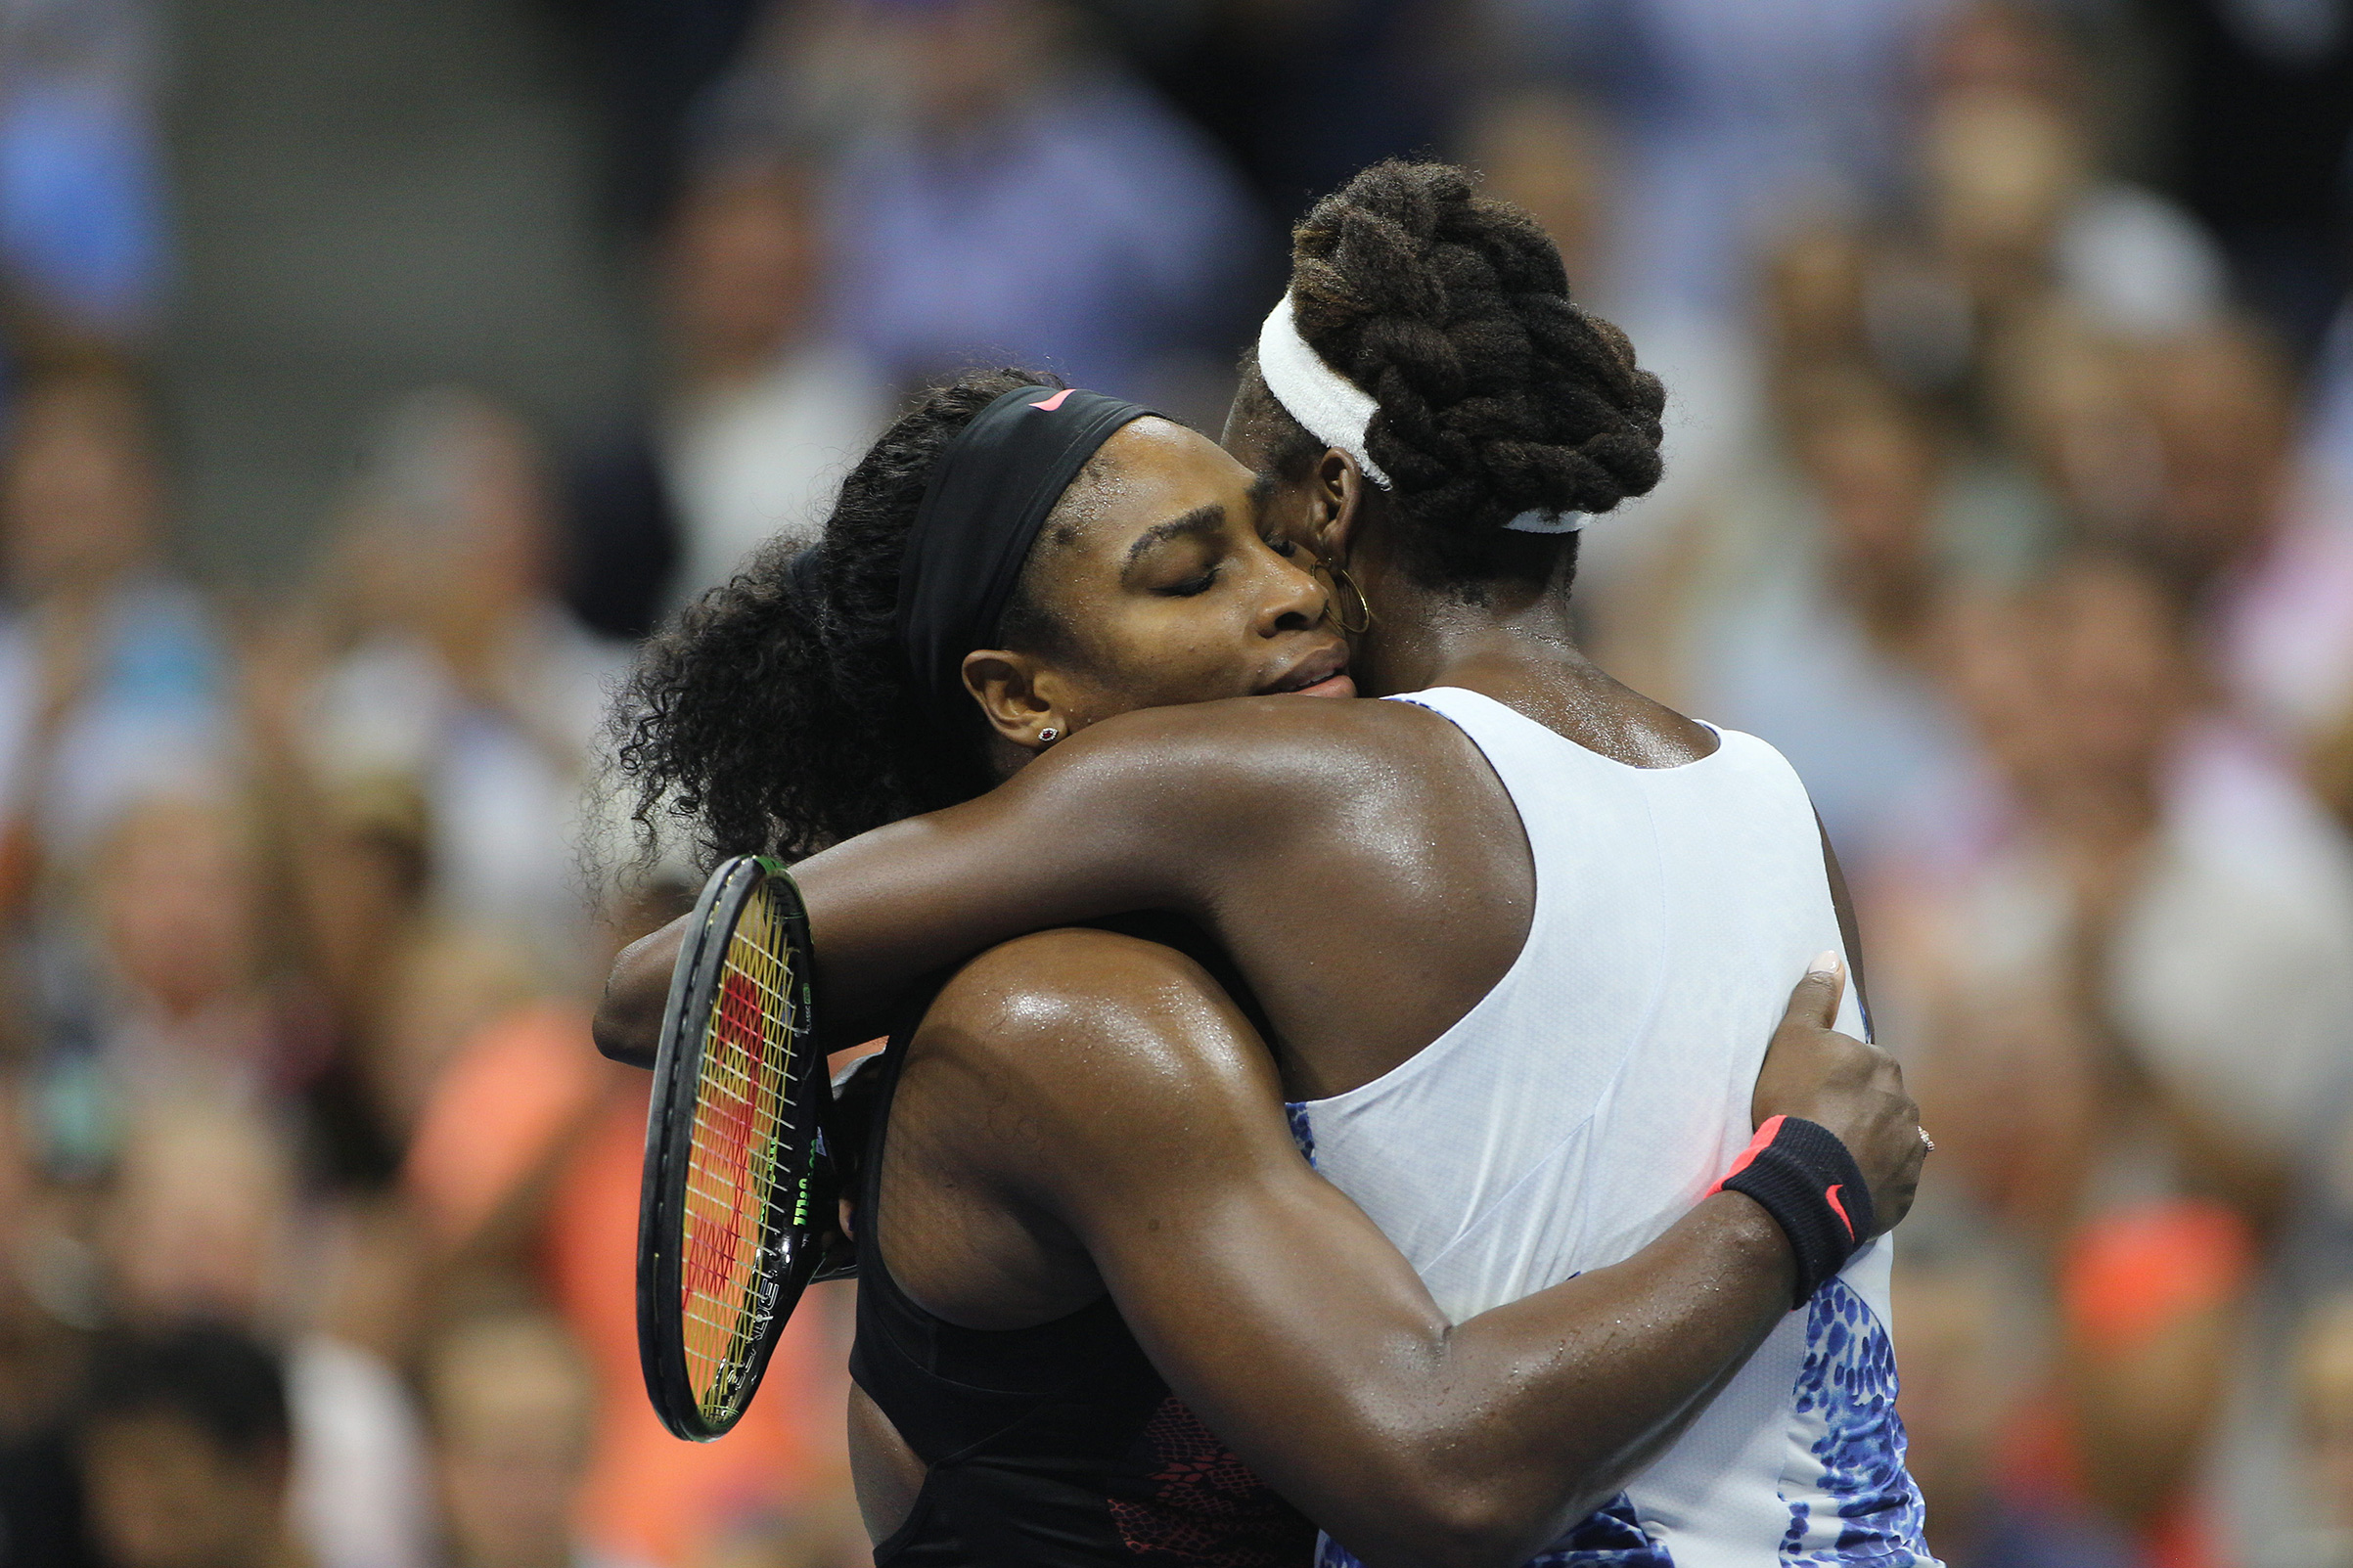 Serena Williams, USA and sister Venus Williams, USA, embrace after in their Women's Singles Quarterfinals match won by Serena during the US Open Tennis Tournament, Flushing, New York, USA on Sept 8, 2015. (Tim Clayton—Corbis/Getty Images)